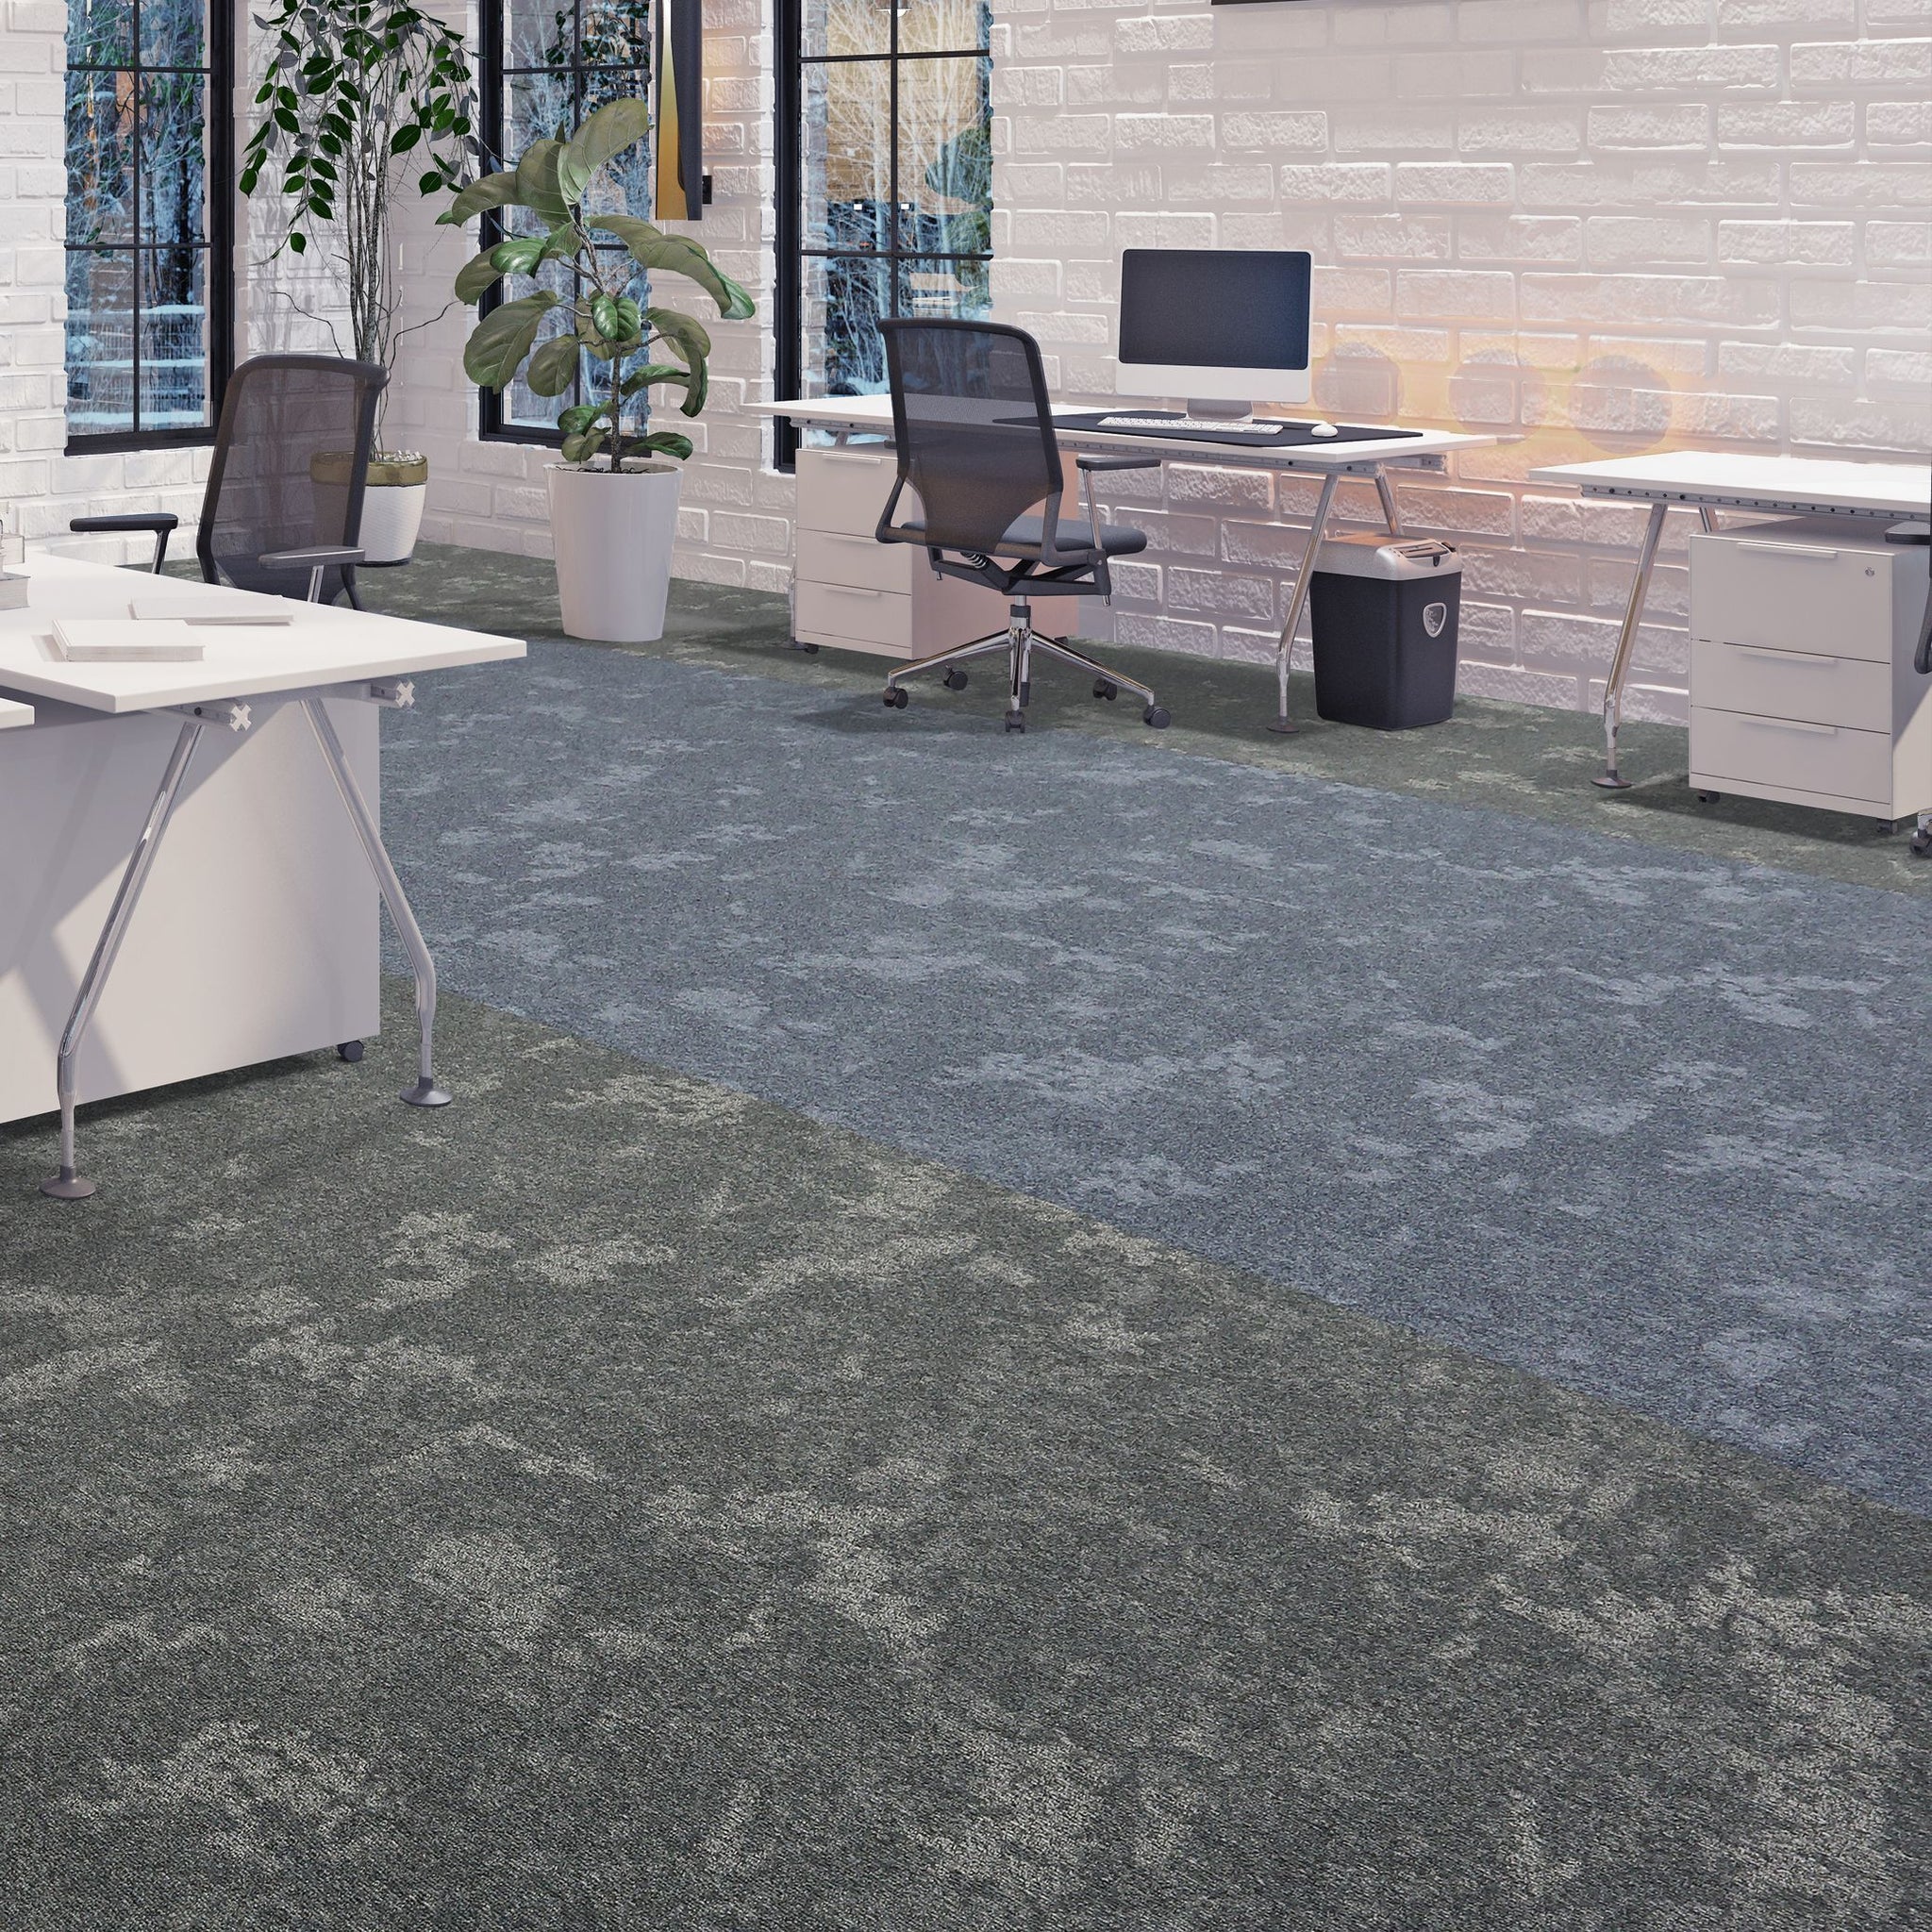 Burmatex Dapple Carpet Tiles: A Fusion of Nature and Sustainability at Fenston Carter